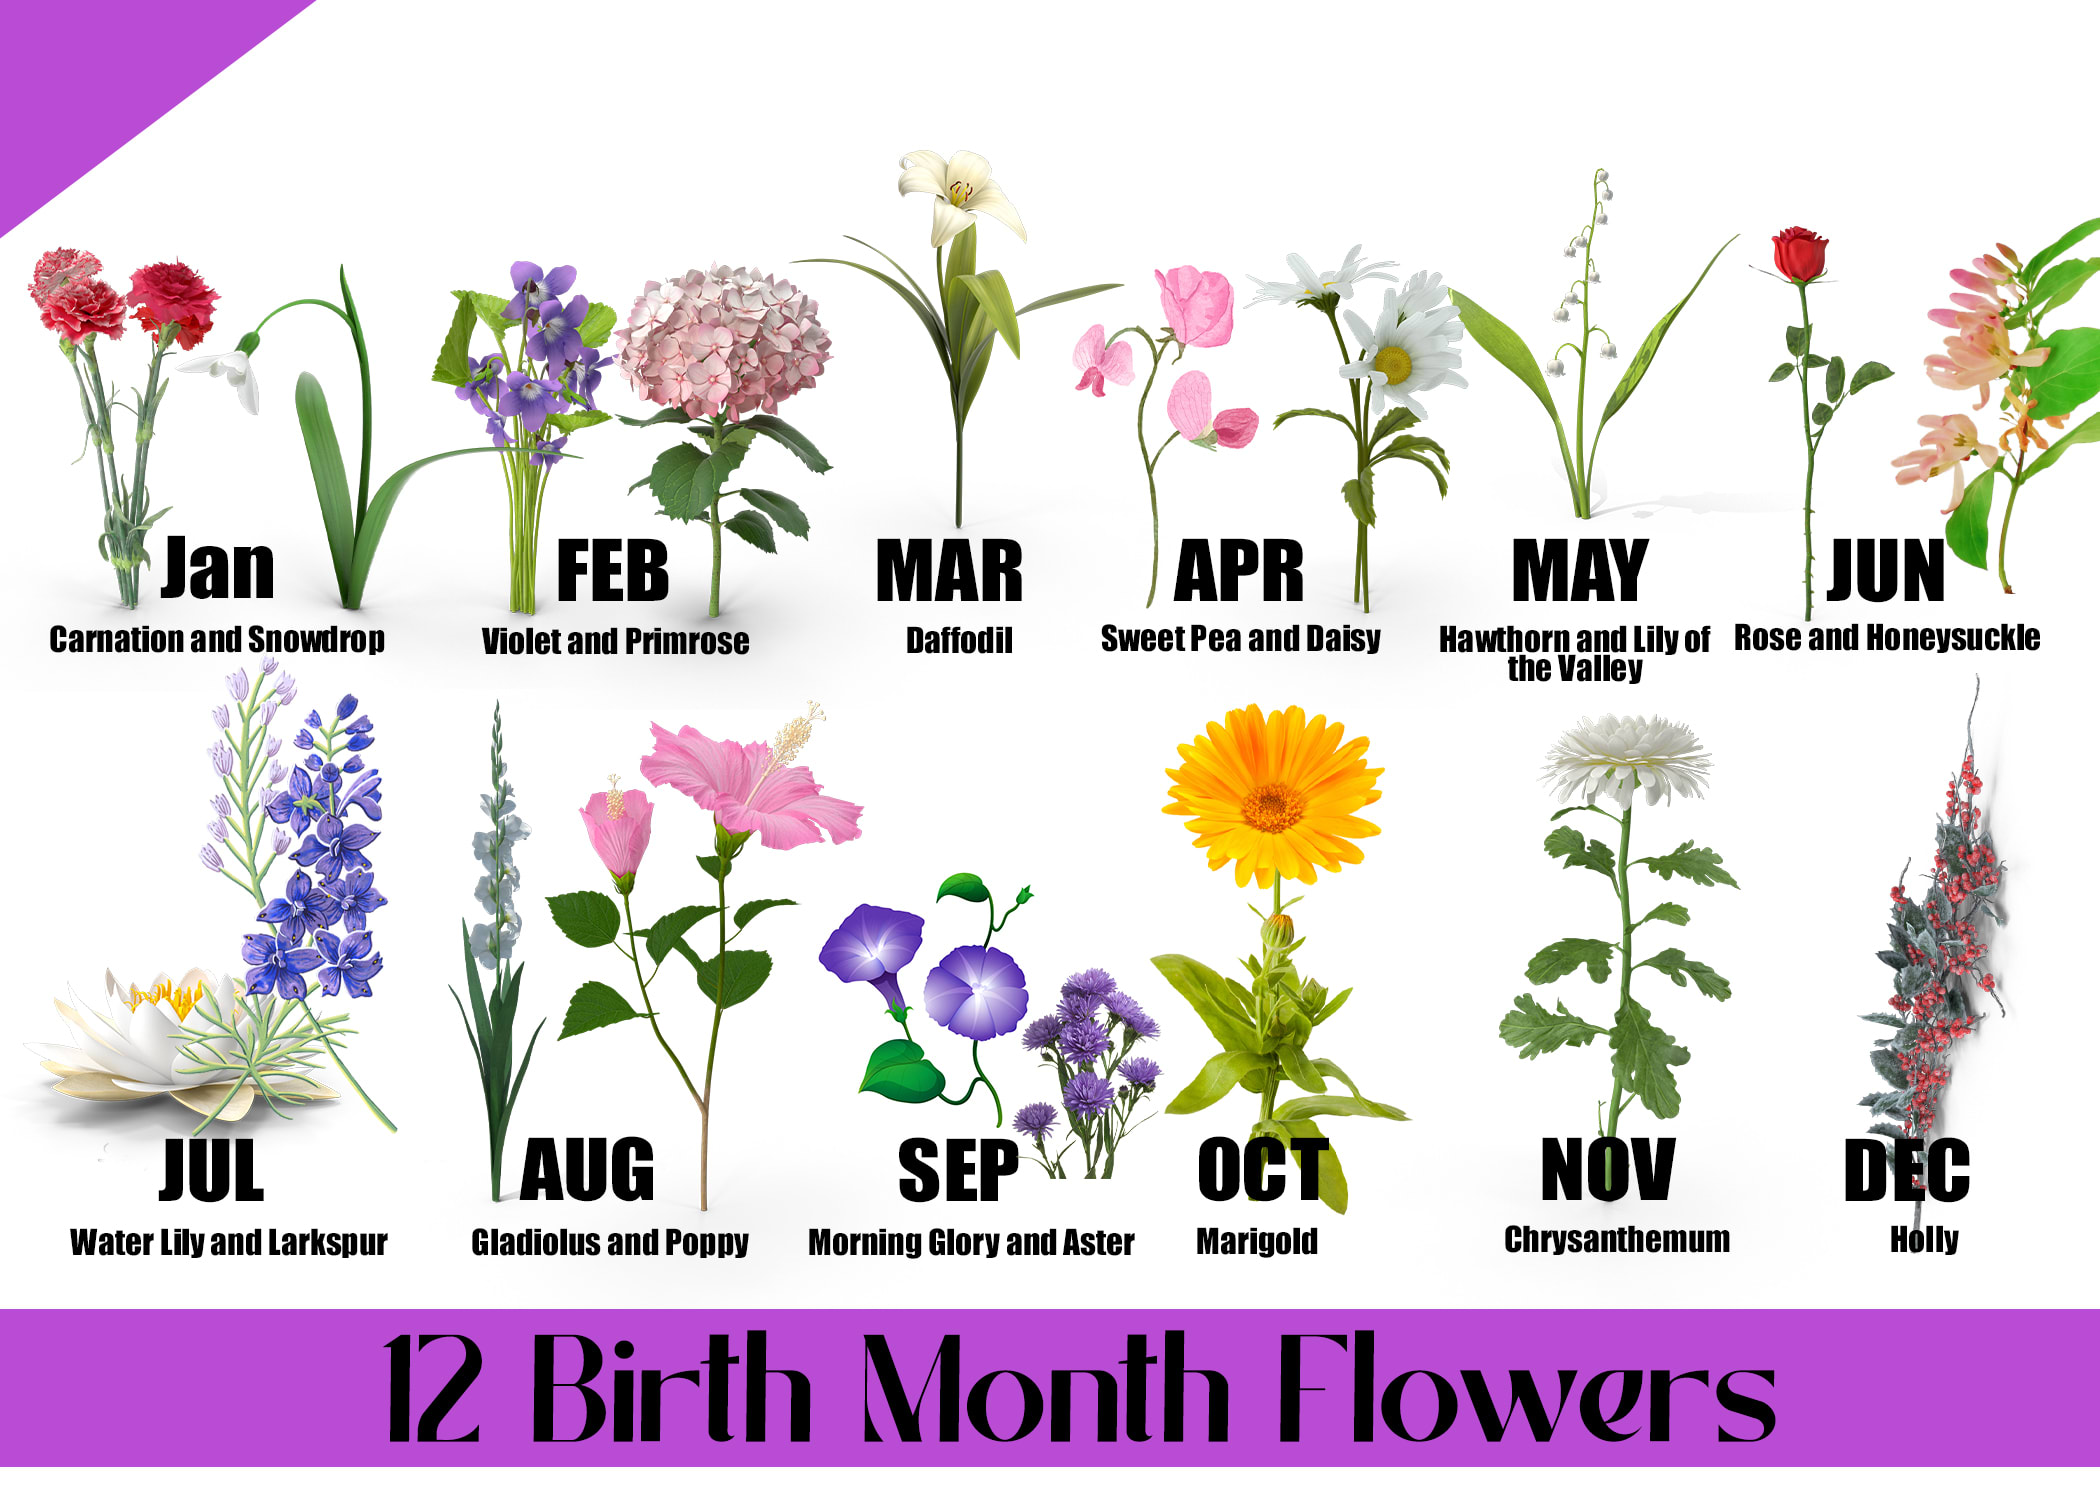 What Is My Birth Flower? - Birth Month Flower Meanings